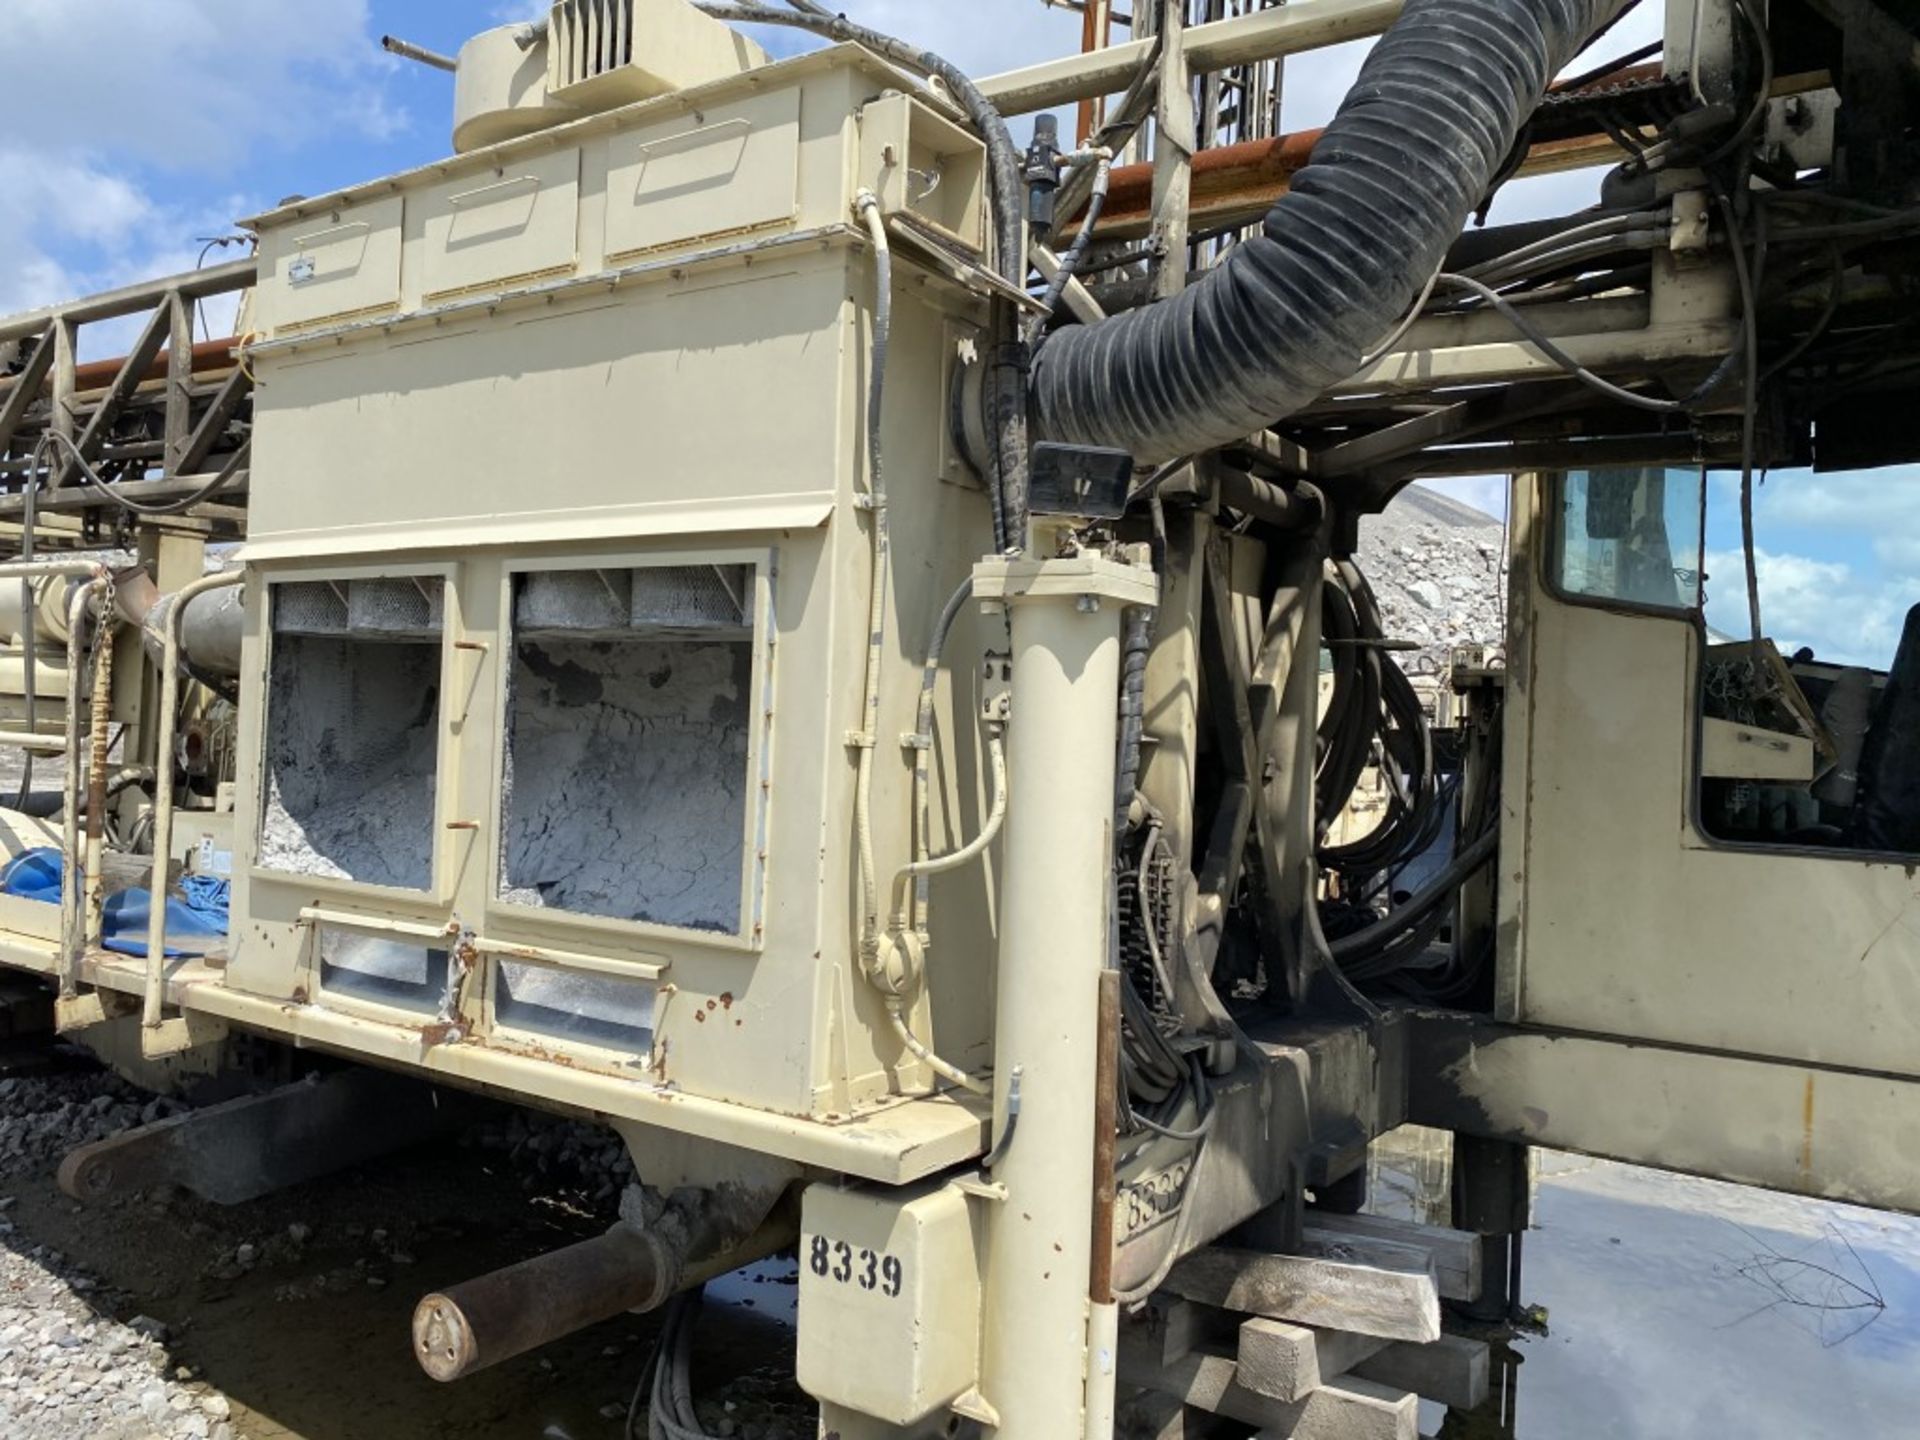 ATLAS COPCO MODEL DML-LP XL 1200 BLASTING HOLE DRILL RIG FOR PARTS, S/N: 8339, MISSING - Image 9 of 12